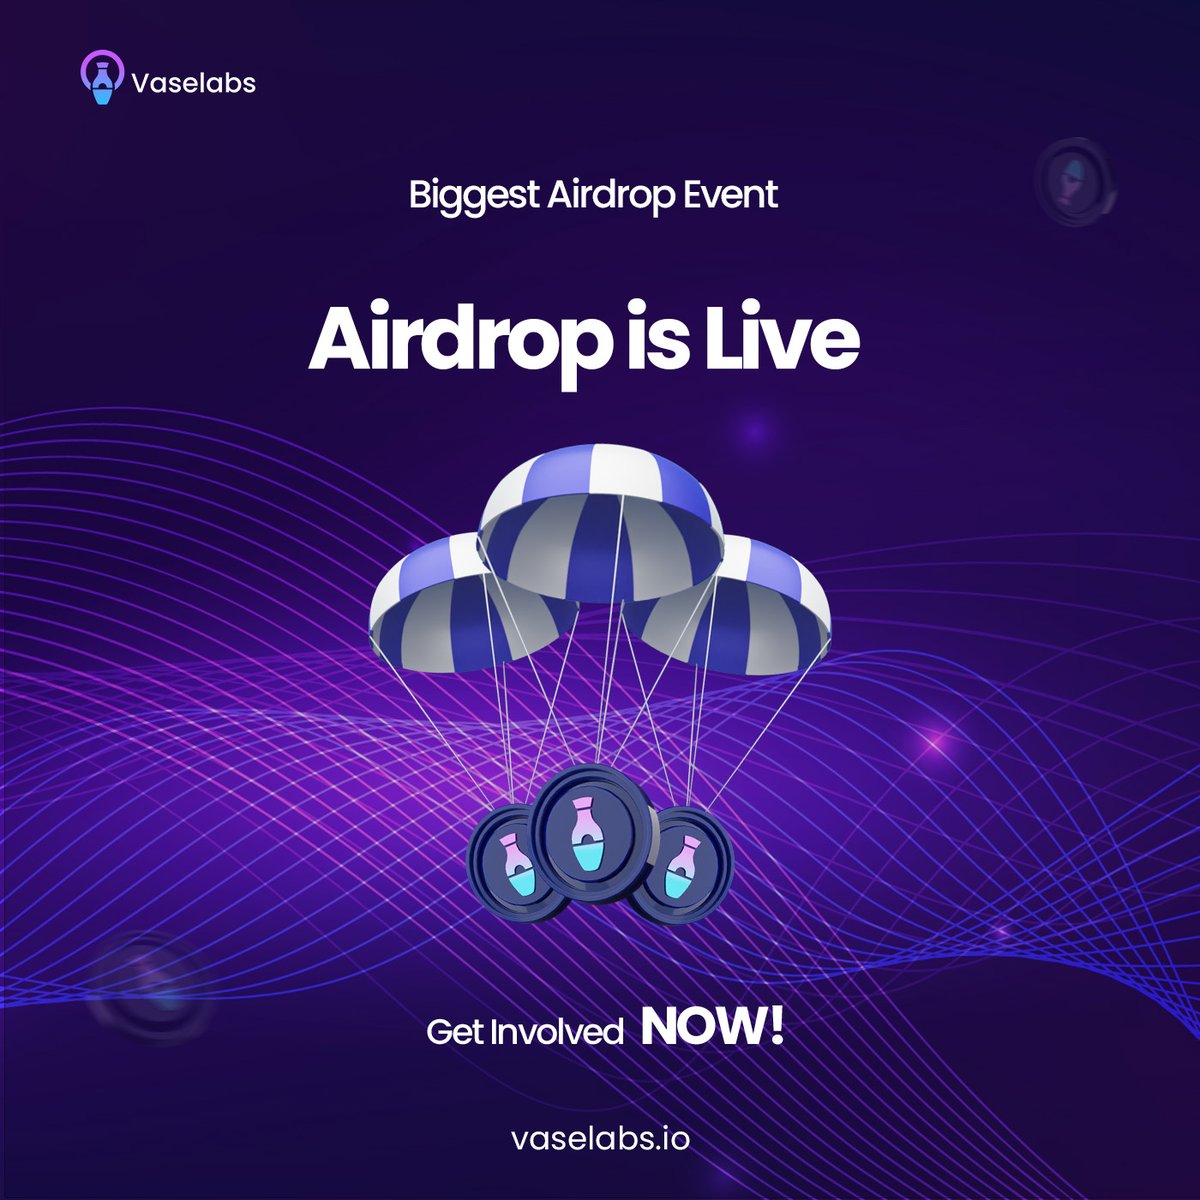 $VSE Airdrop is Live. 🔥 Stand a chance to win big in the $25,000 💶 XVT prize pool. Perform daily tasks to accumulate more XVT. Join here: 👇👇 vaselabs.io/airdrop-v2 #vasetoken #vaselabs #Airdrops #Giveaways #vse